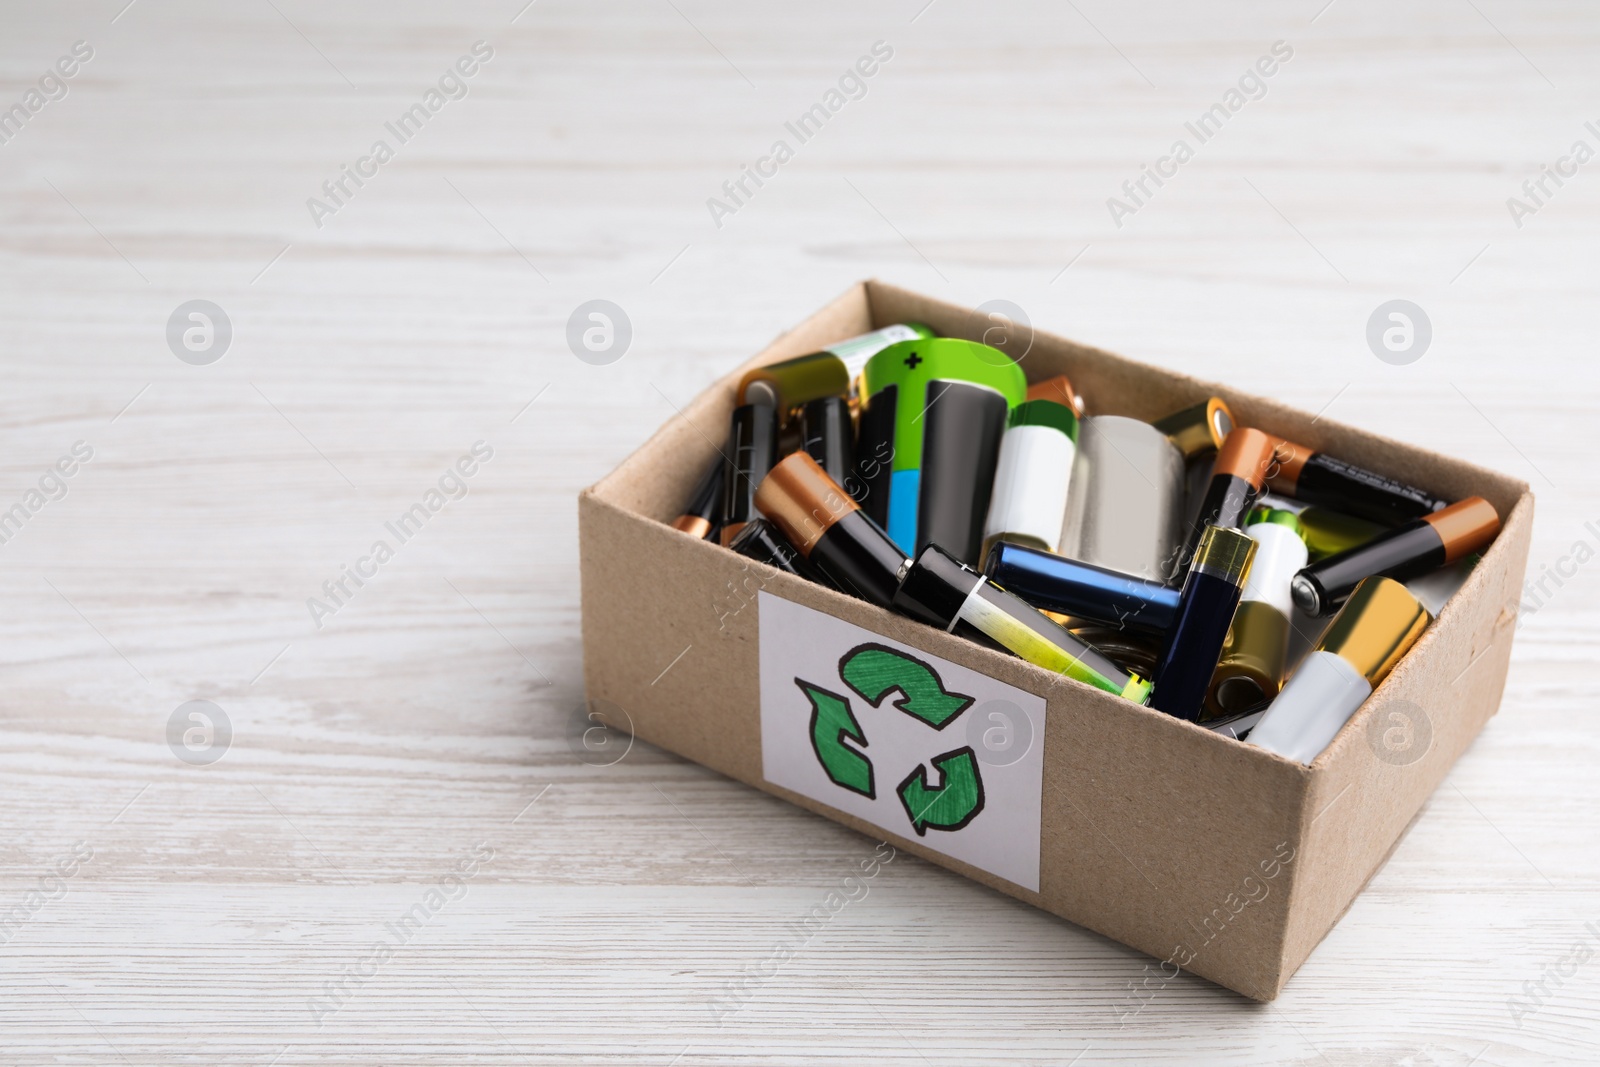 Image of Used batteries in cardboard box with recycling symbol on white wooden table, space for text